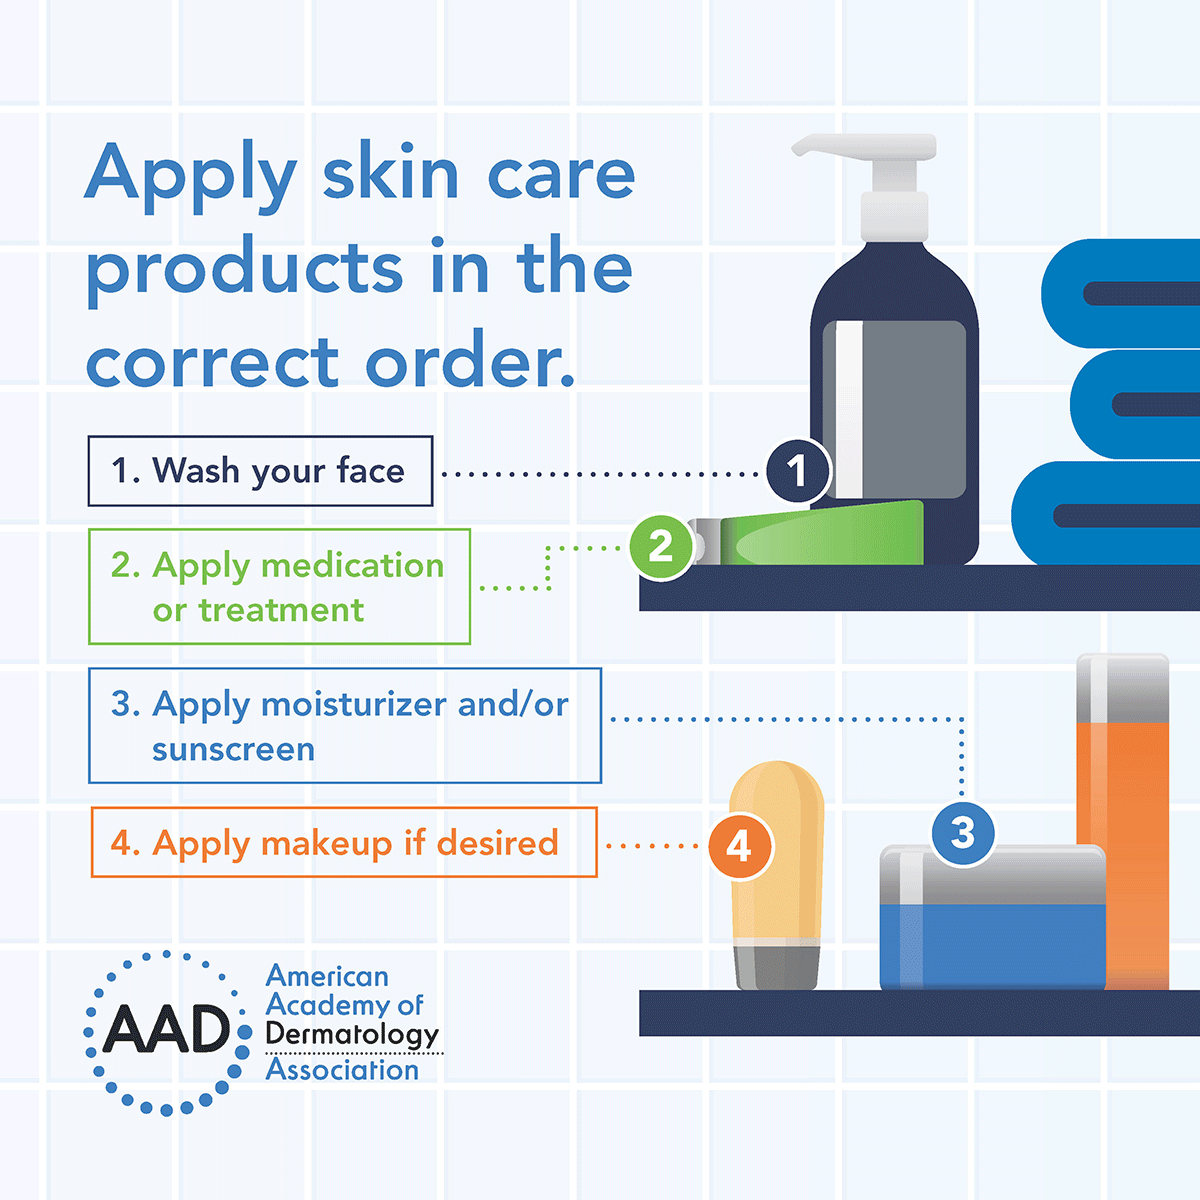 Infographic explaining the correct order to apply skin care products.